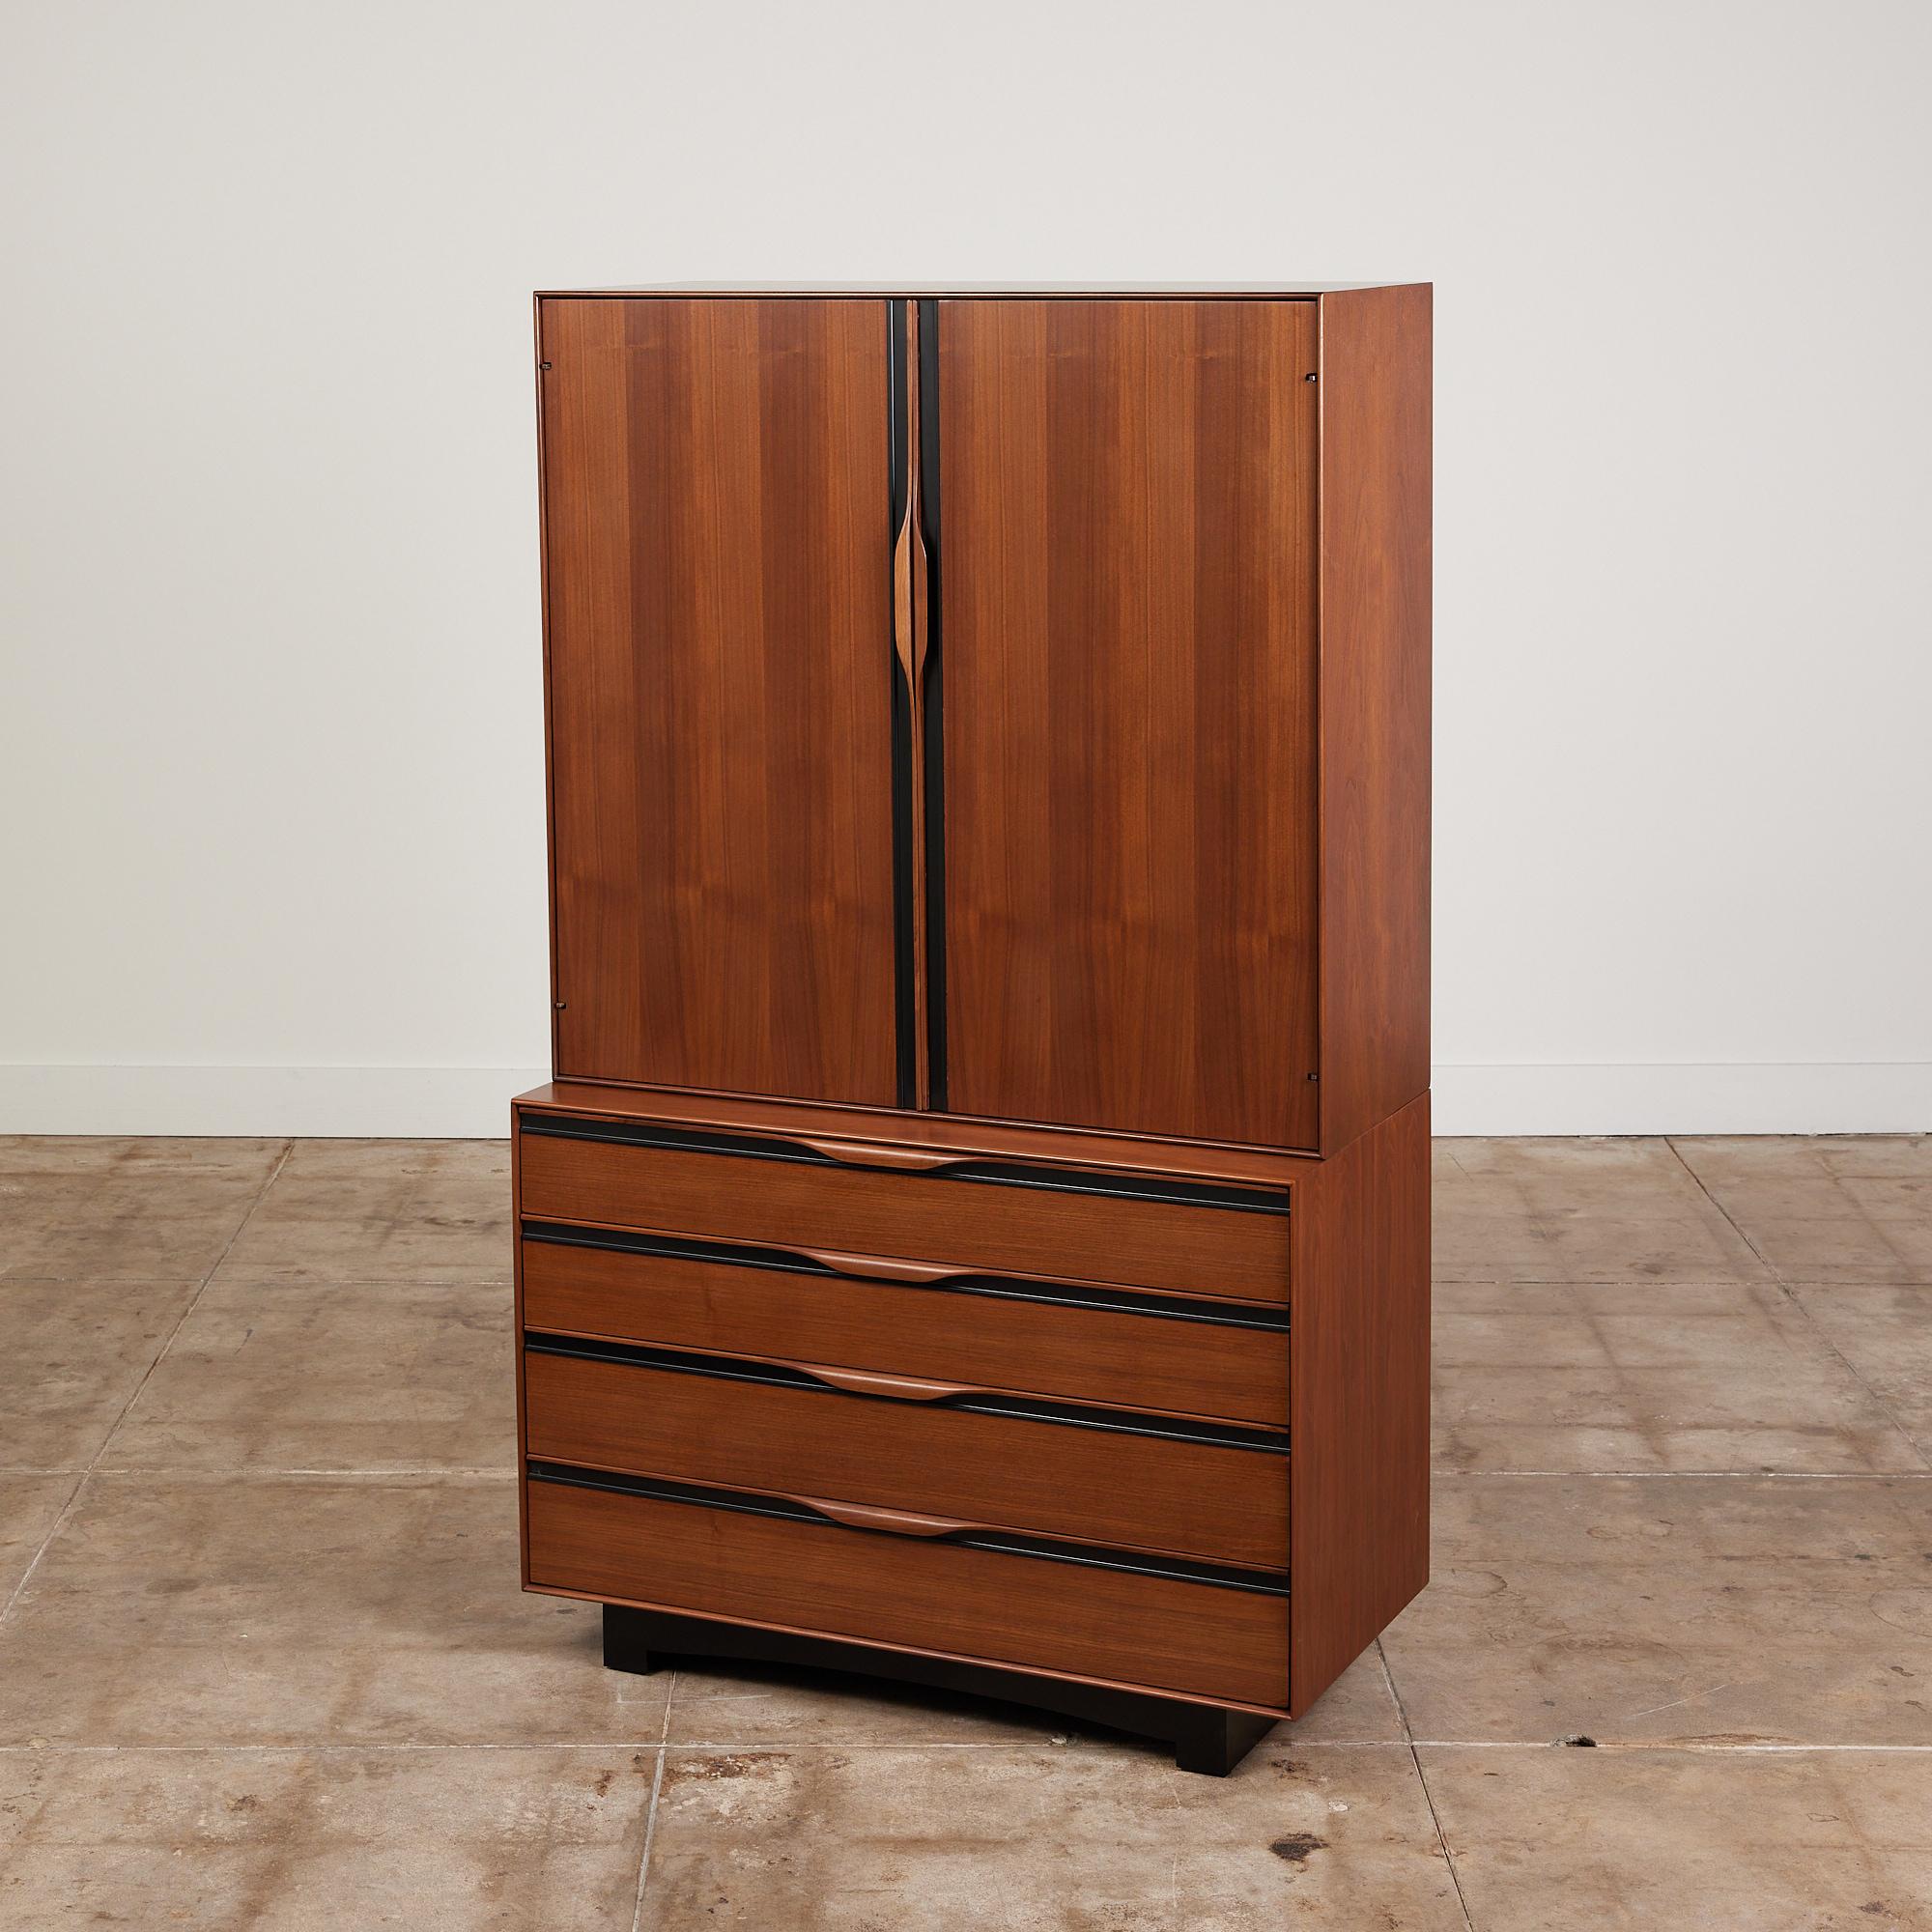 Walnut armoire by John Kapel for Glenn of California, c.1960s, USA. The piece features four drawers with sculpted handles and black laminate linear detailing. Three of the lower drawers are divided into compartments. Above the dressers drawers rests